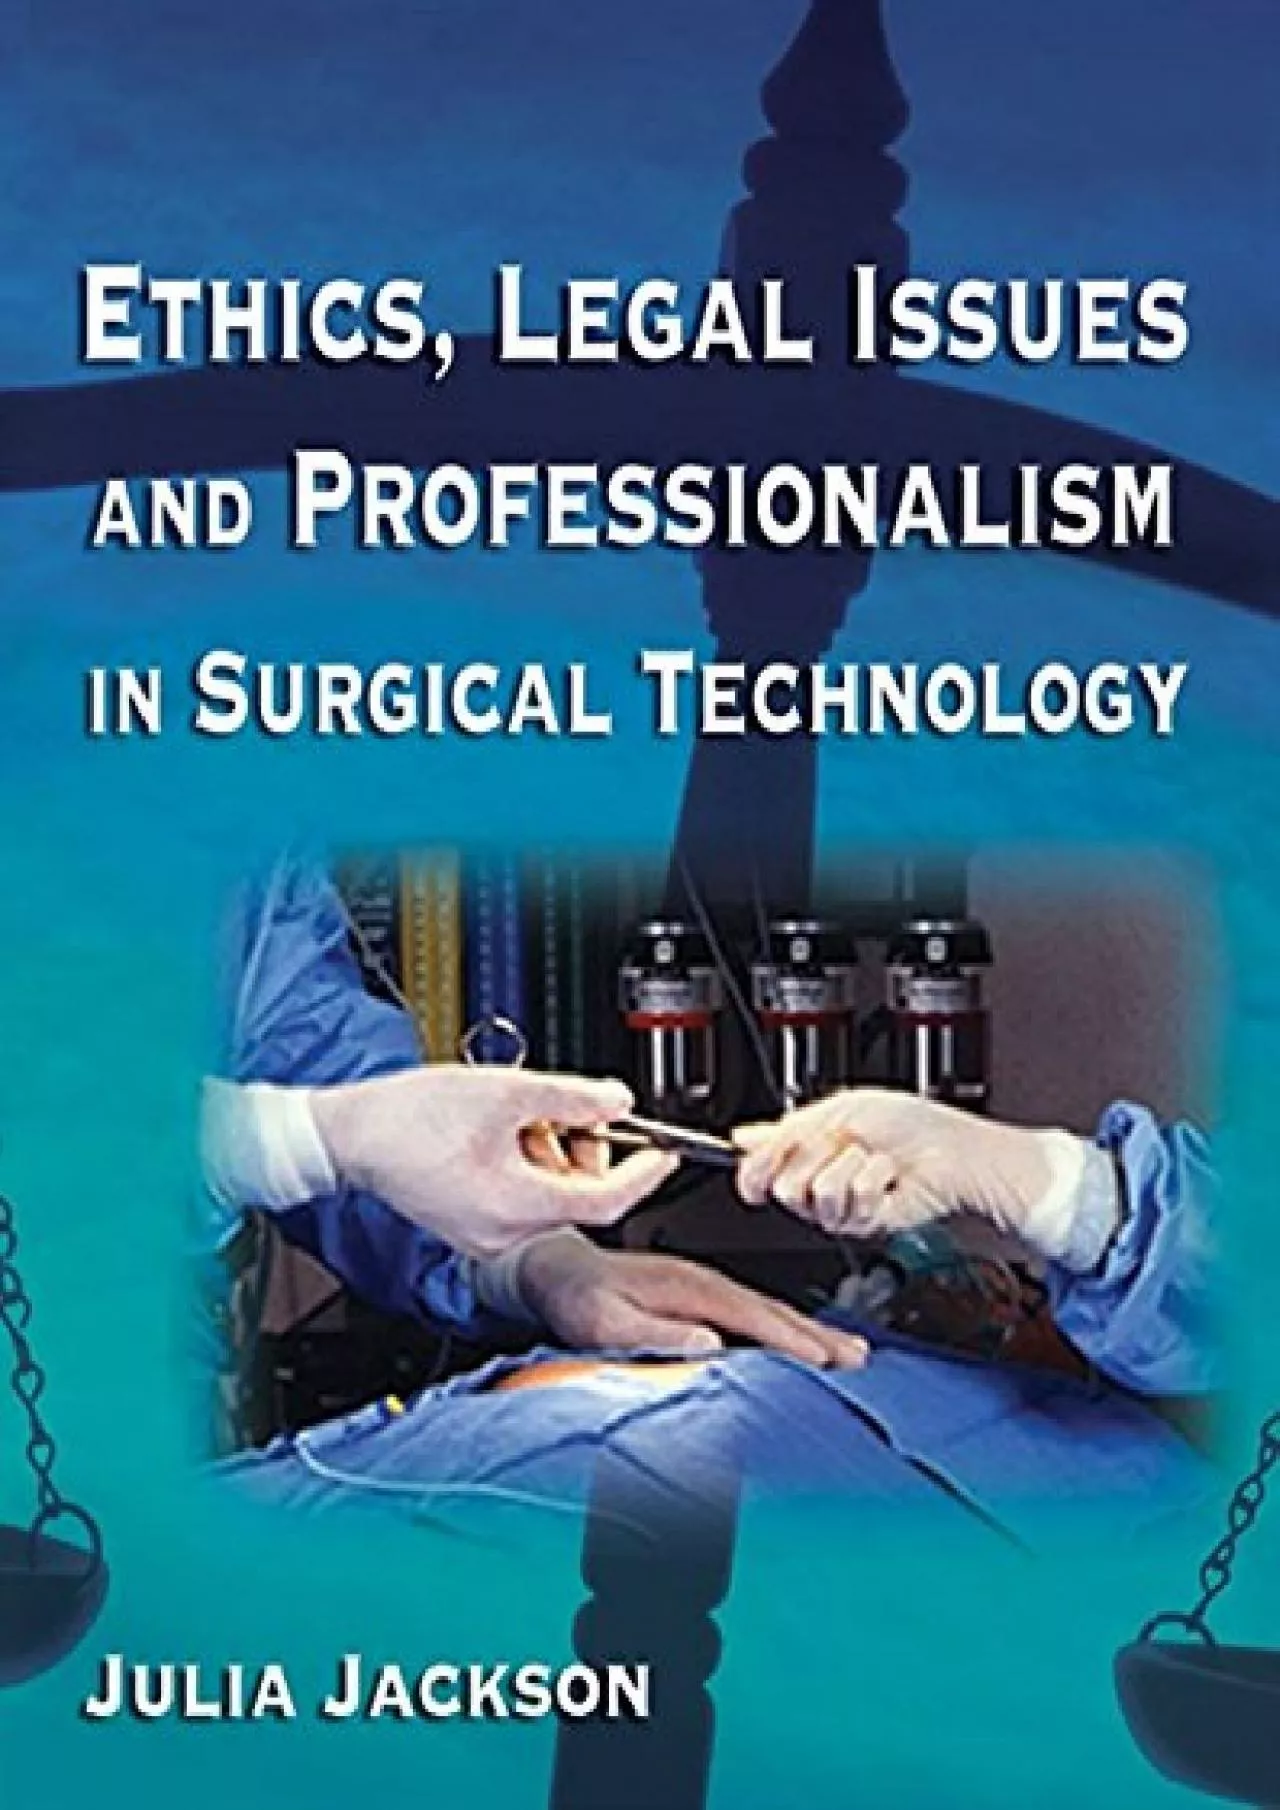 (DOWNLOAD)-Ethics, Legal Issues and Professionalism in Surgical Technology